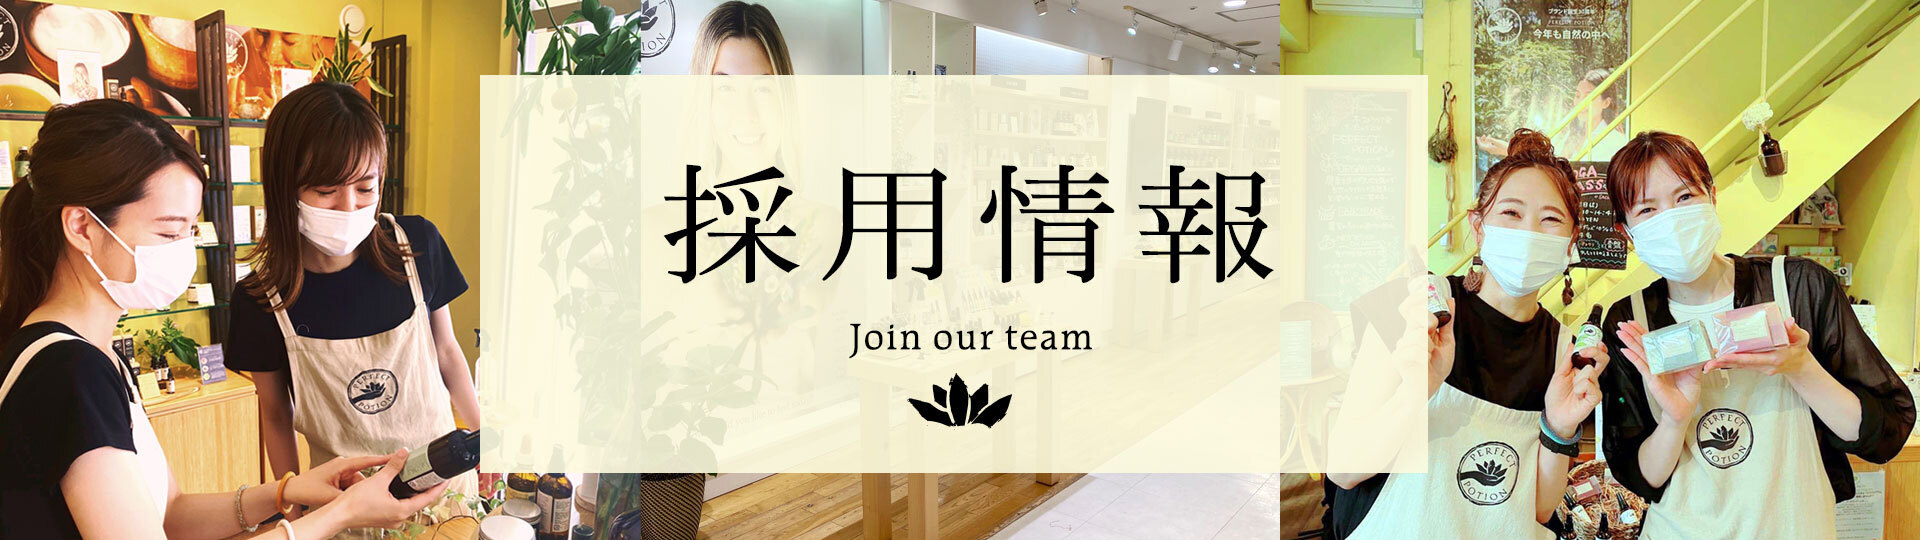 Join our team 採用情報